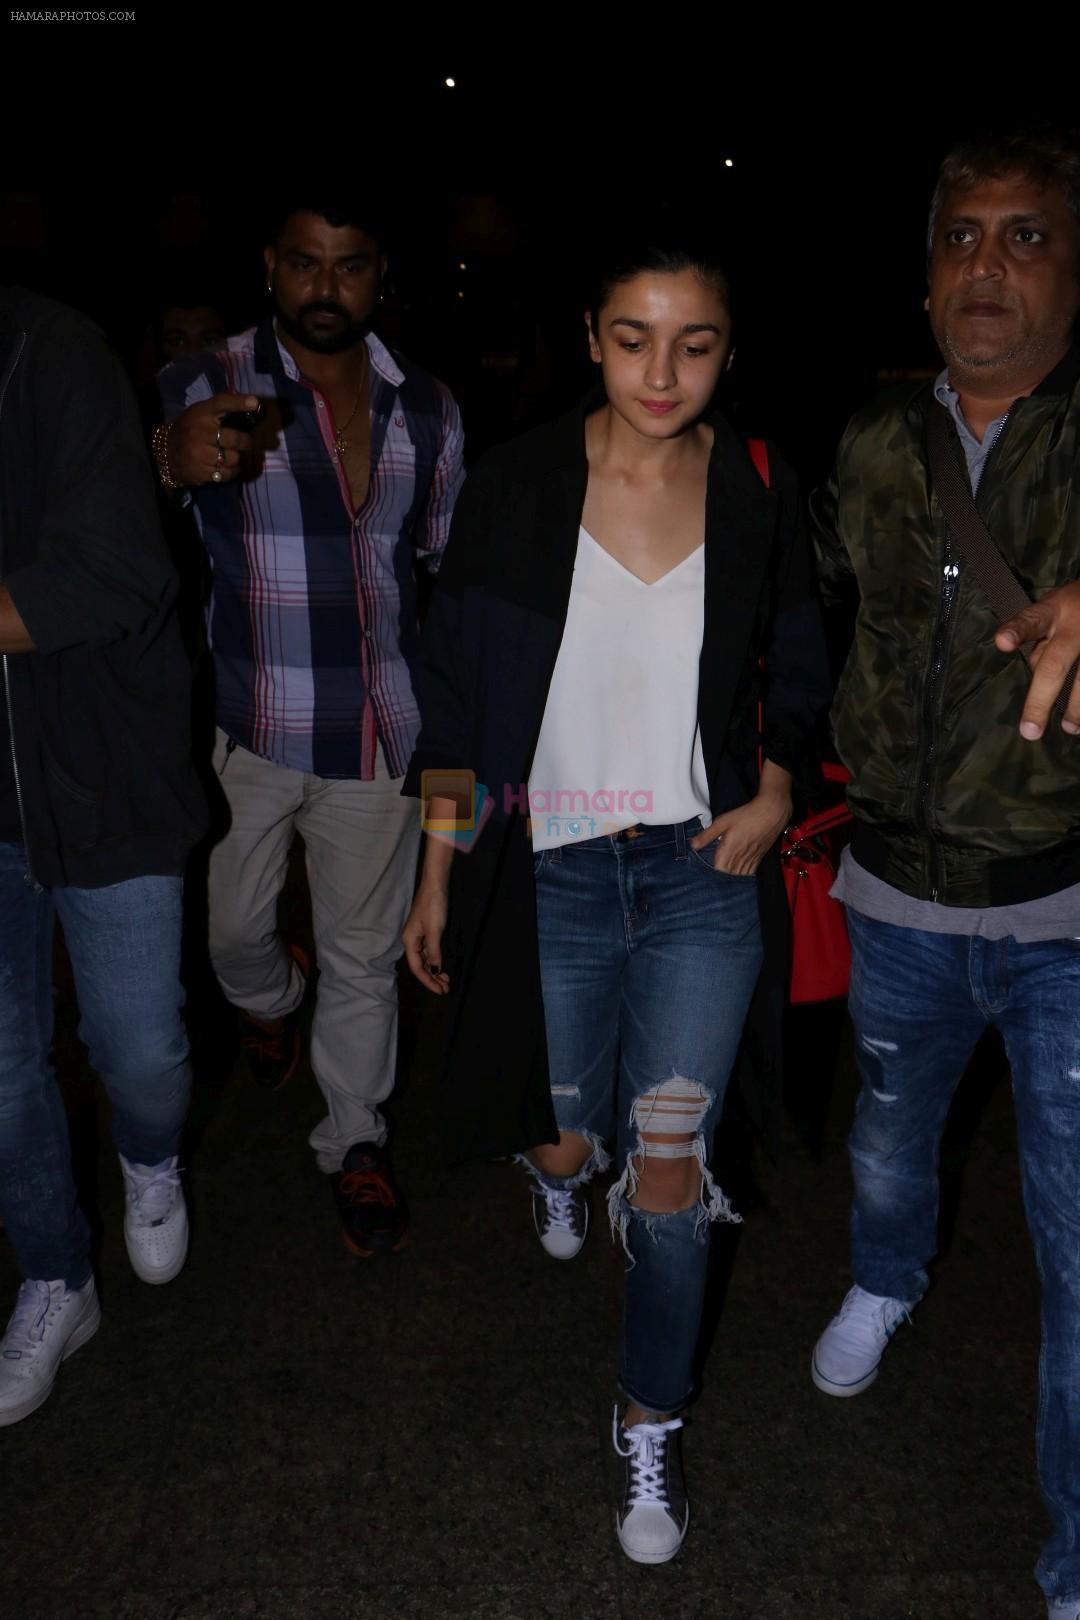 Alia Bhatt Spotted At Airport on 18th July 2017